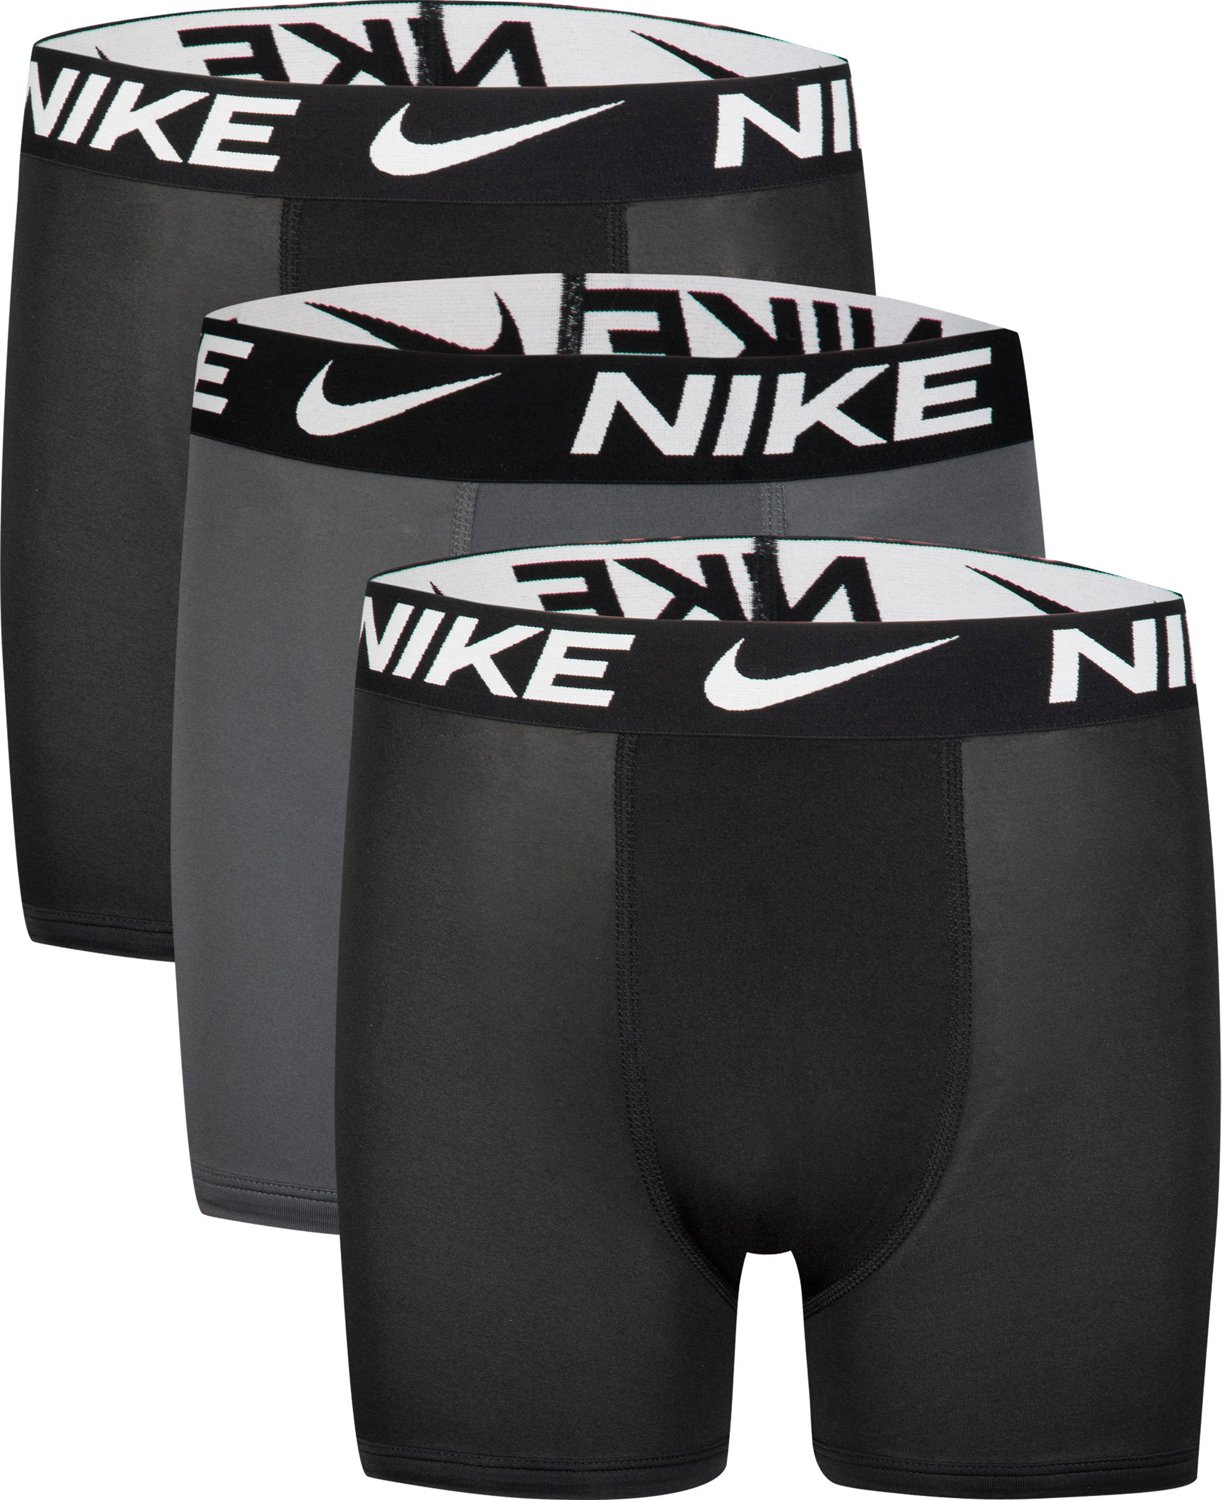 Nike Boys' Boxer Briefs 3-Pack | Free Shipping at Academy